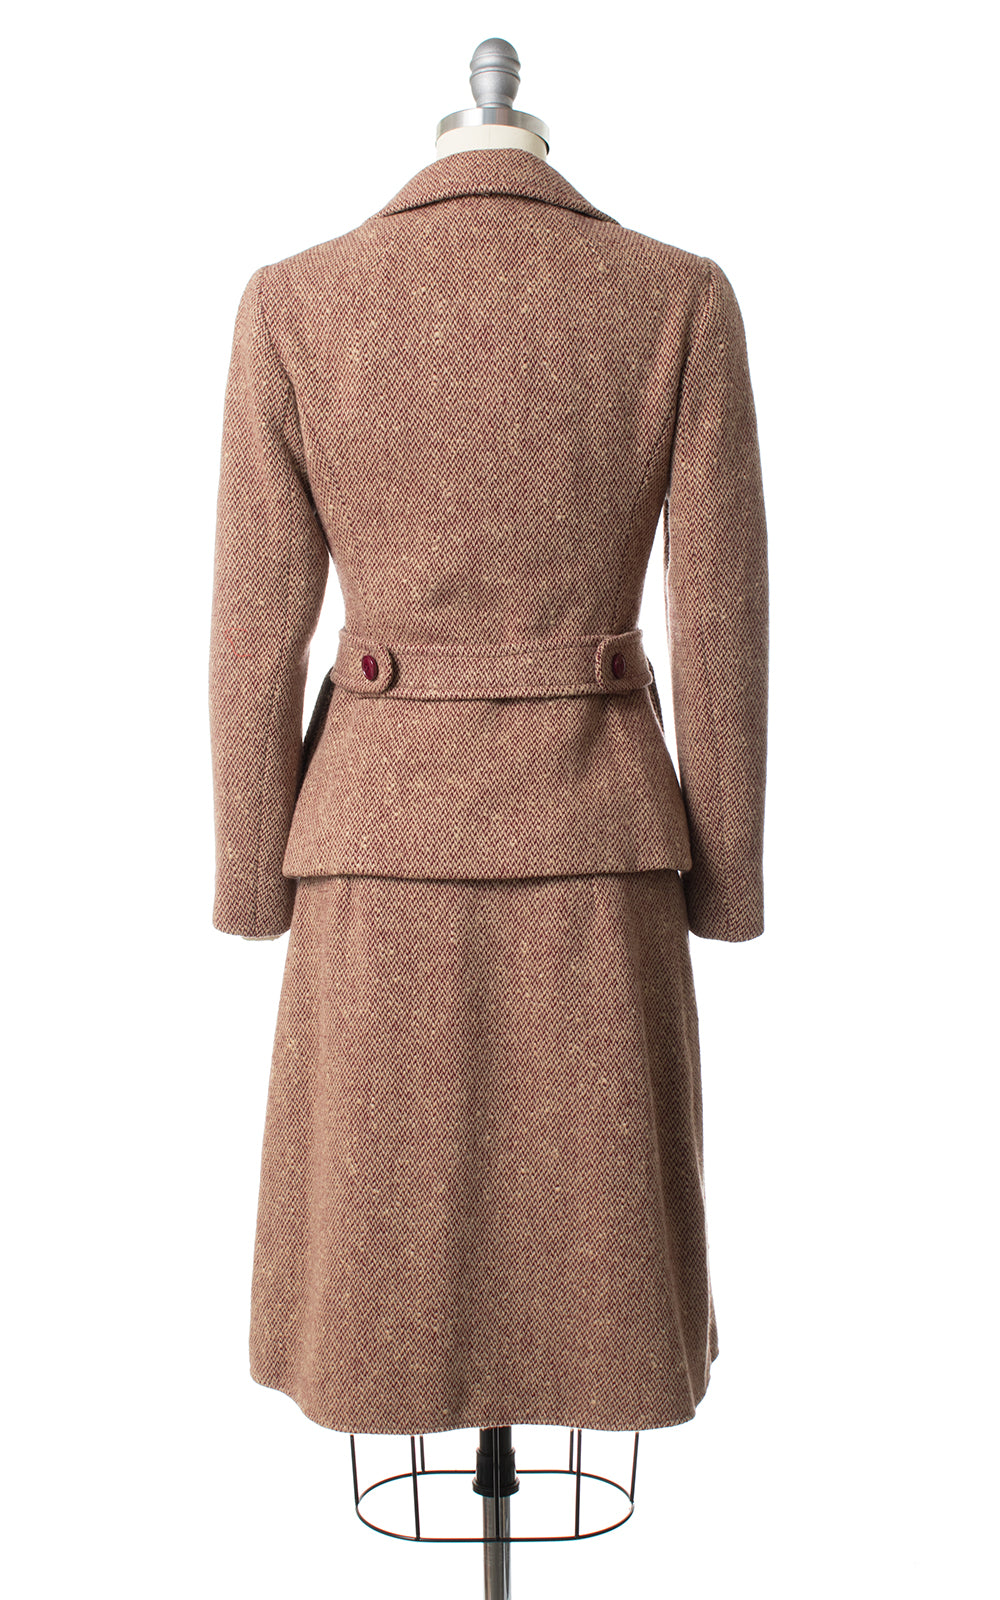 1970s does 1940s Burgundy Wool Blazer and Skirt Suit